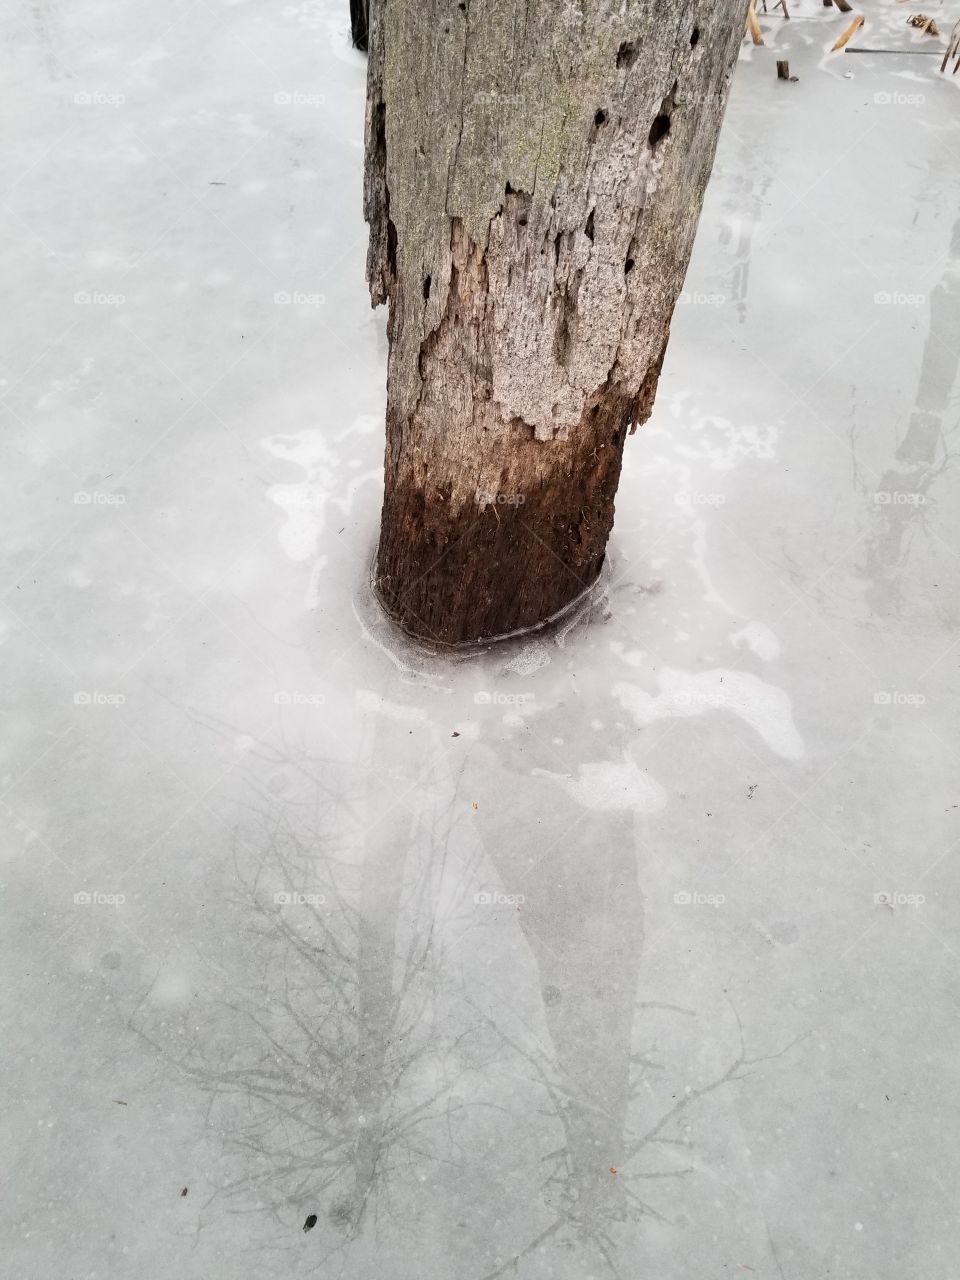 swamp tree reflection in ice